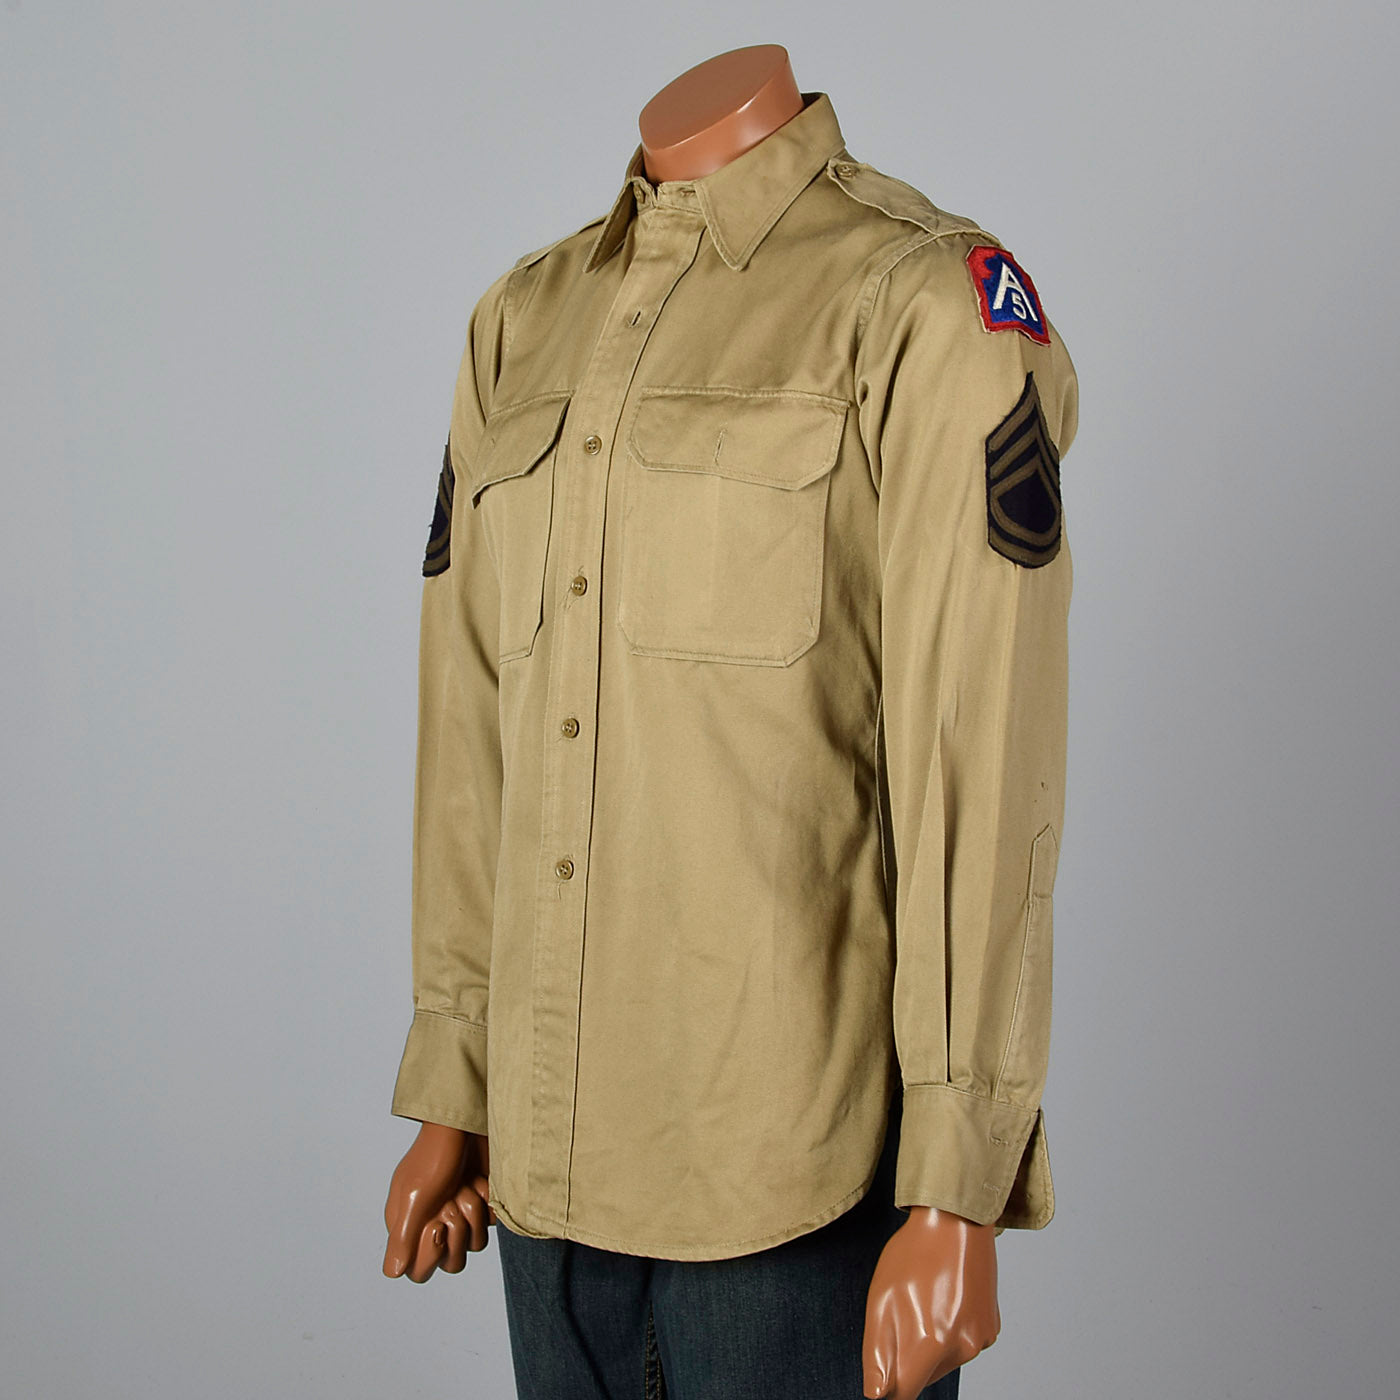 1940s Cotton US Military Shirt with Patches